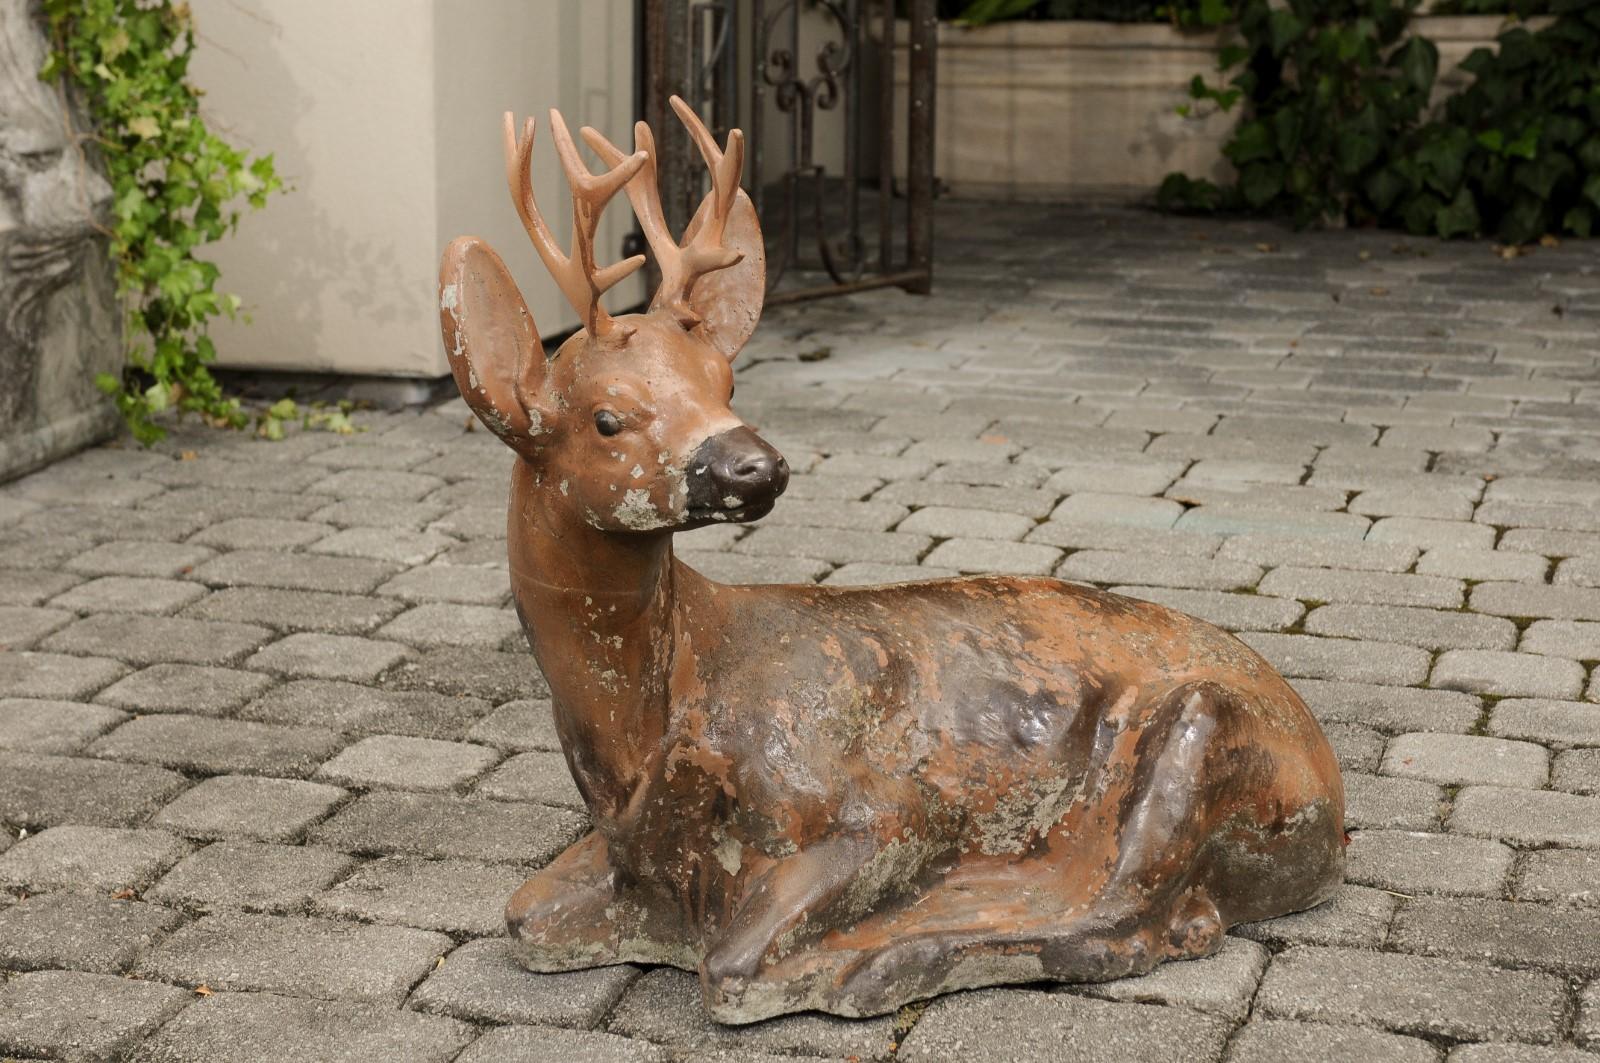 A vintage American concrete deer sculpture with iron antlers and weathered patina. Born during the first half of the 20th century, this deer sculpture charms our eyes with its touching representation. Boasting a nicely worn appearance, the sculpture